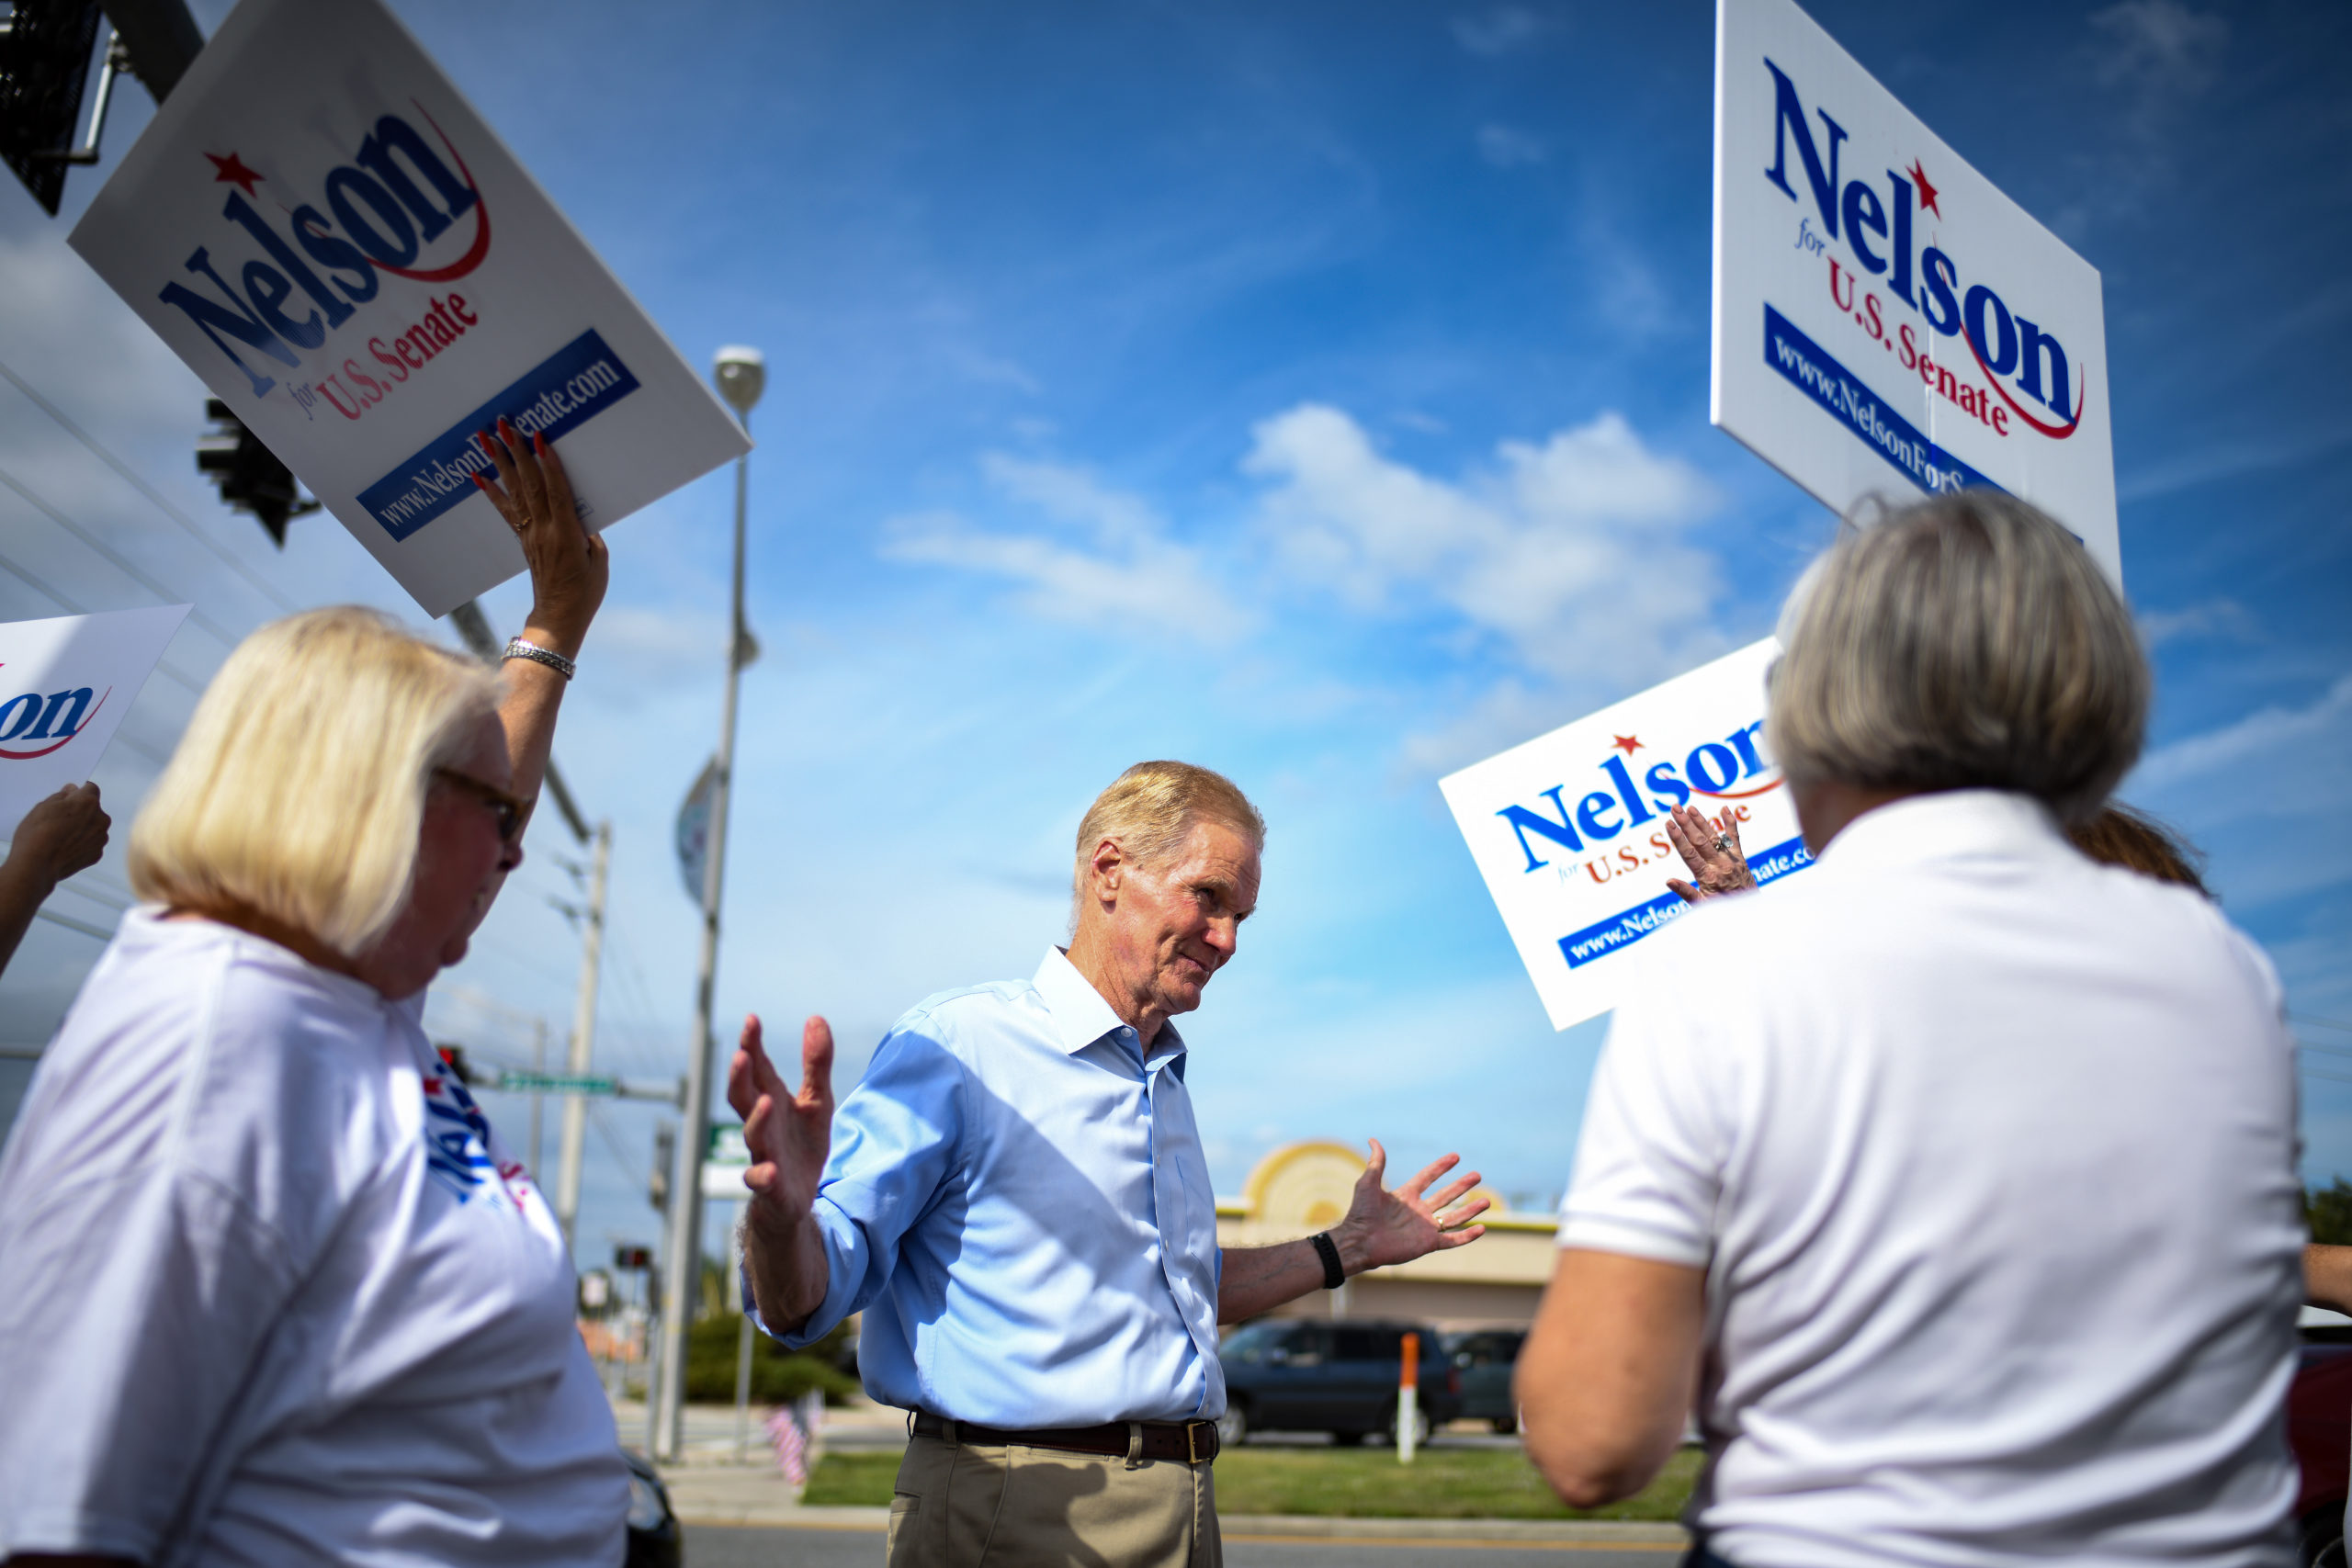 MELBOURNE, FLORIDA - NOVEMBER 05: Senator Bill Nelson (D-FL) attends an election sign waving event at US 1 at US 1 & Eau Gallie Boulevard during the final full day of campaigning in the midterm election on November 5, 2018 in Melbourne, Florida. Nelson is running against Republican Governor of Florida Rick Scott for the Florida Senate seat. (Photo by Jeff J Mitchell/Getty Images)